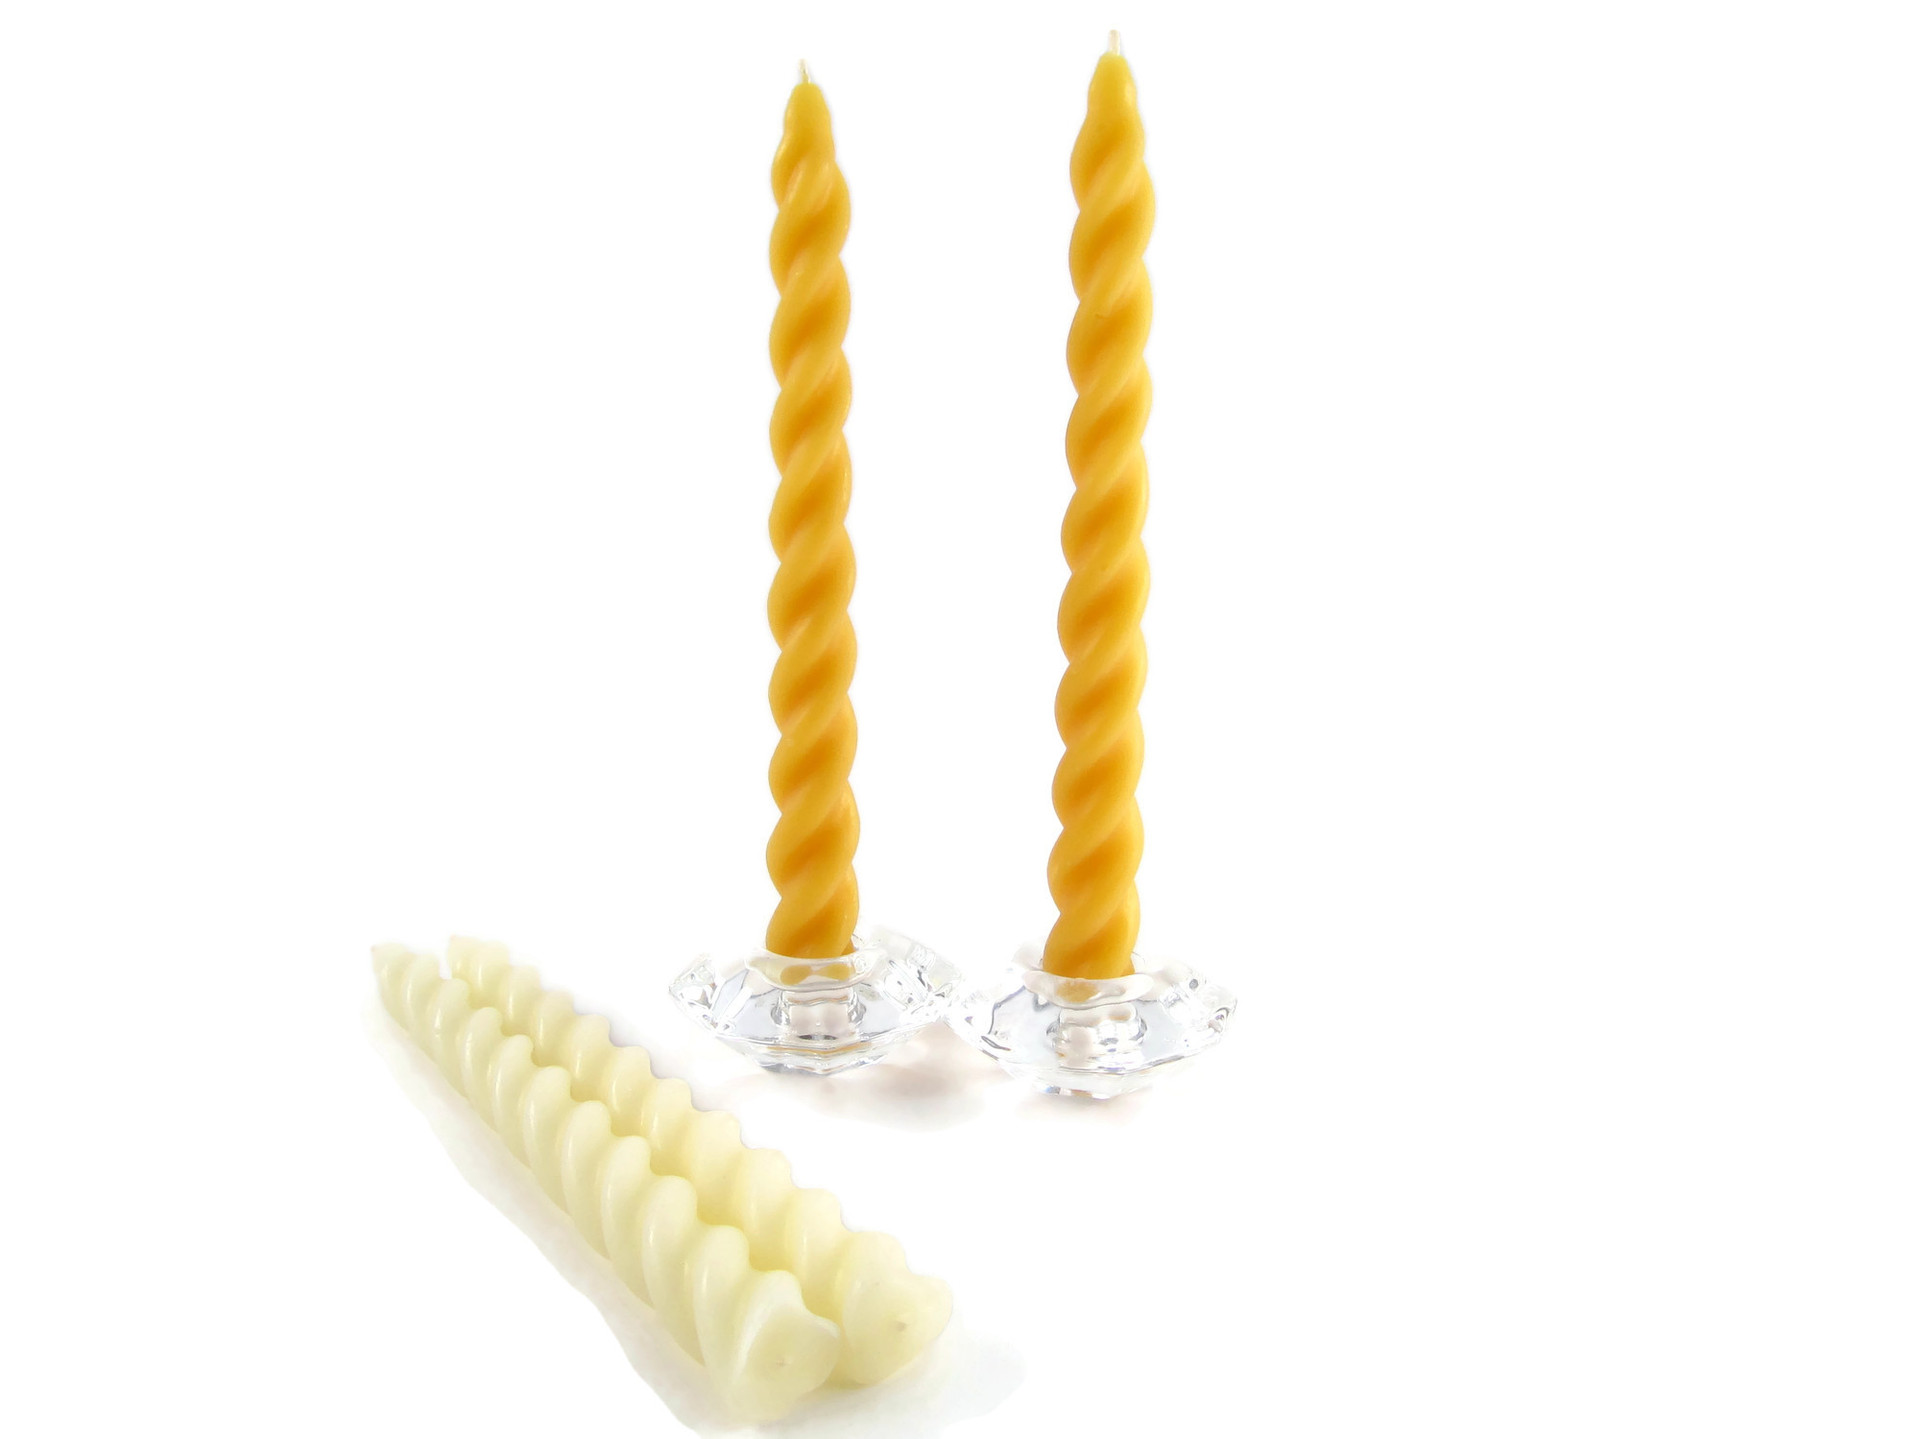 Beeswax Candle Making Kit – Happy Little Folks